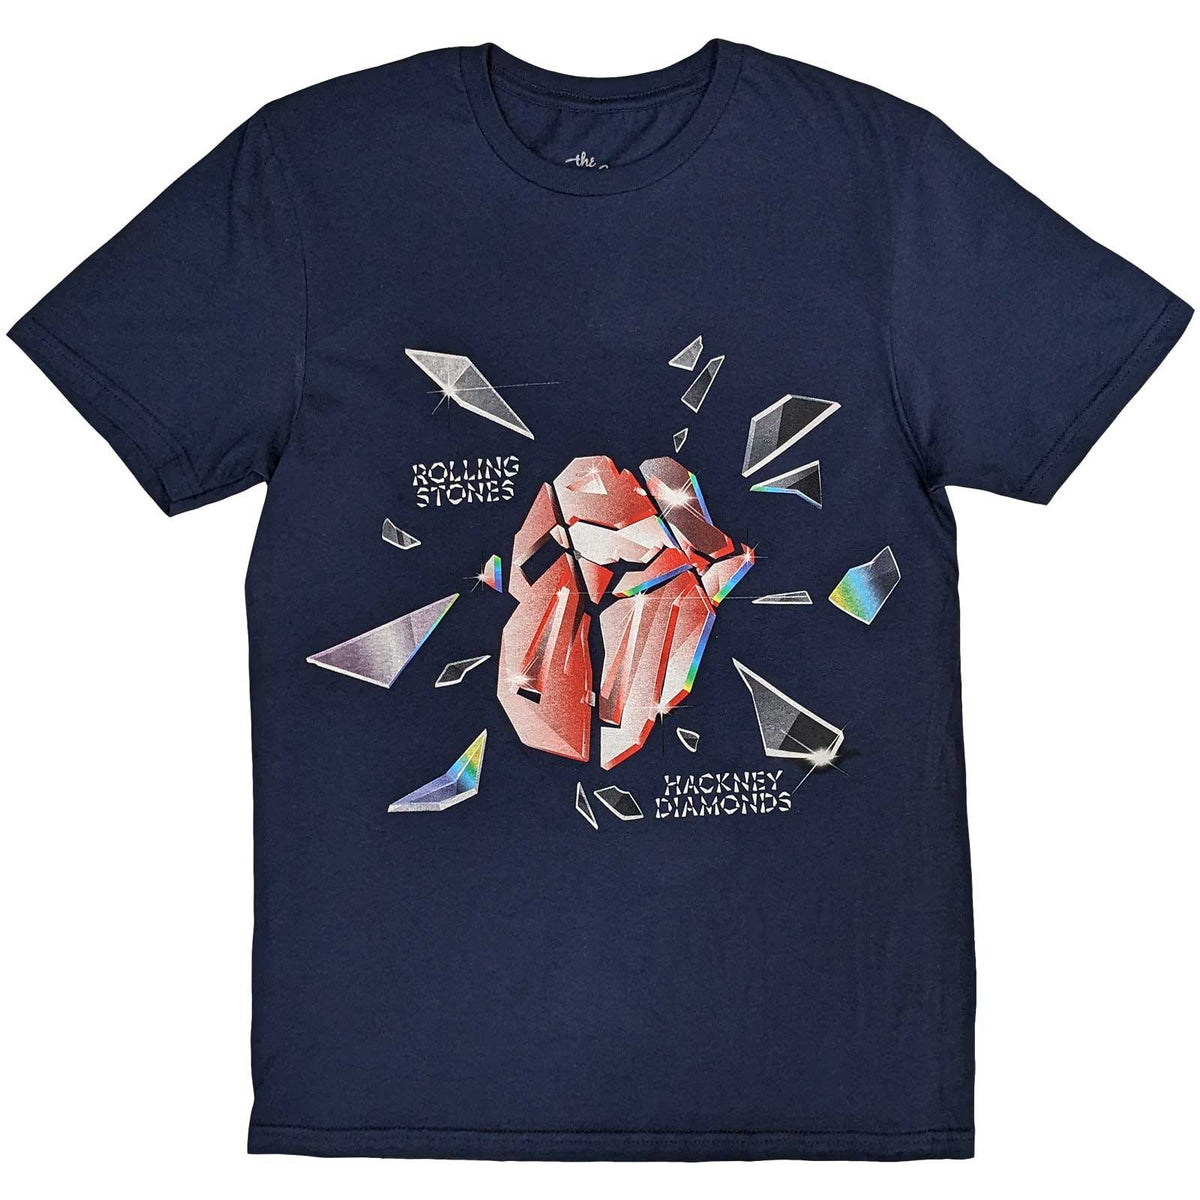 The Rolling Stones Adult T-Shirt - Hackney Diamonds Explosion - Navy Blue Official Licensed Design